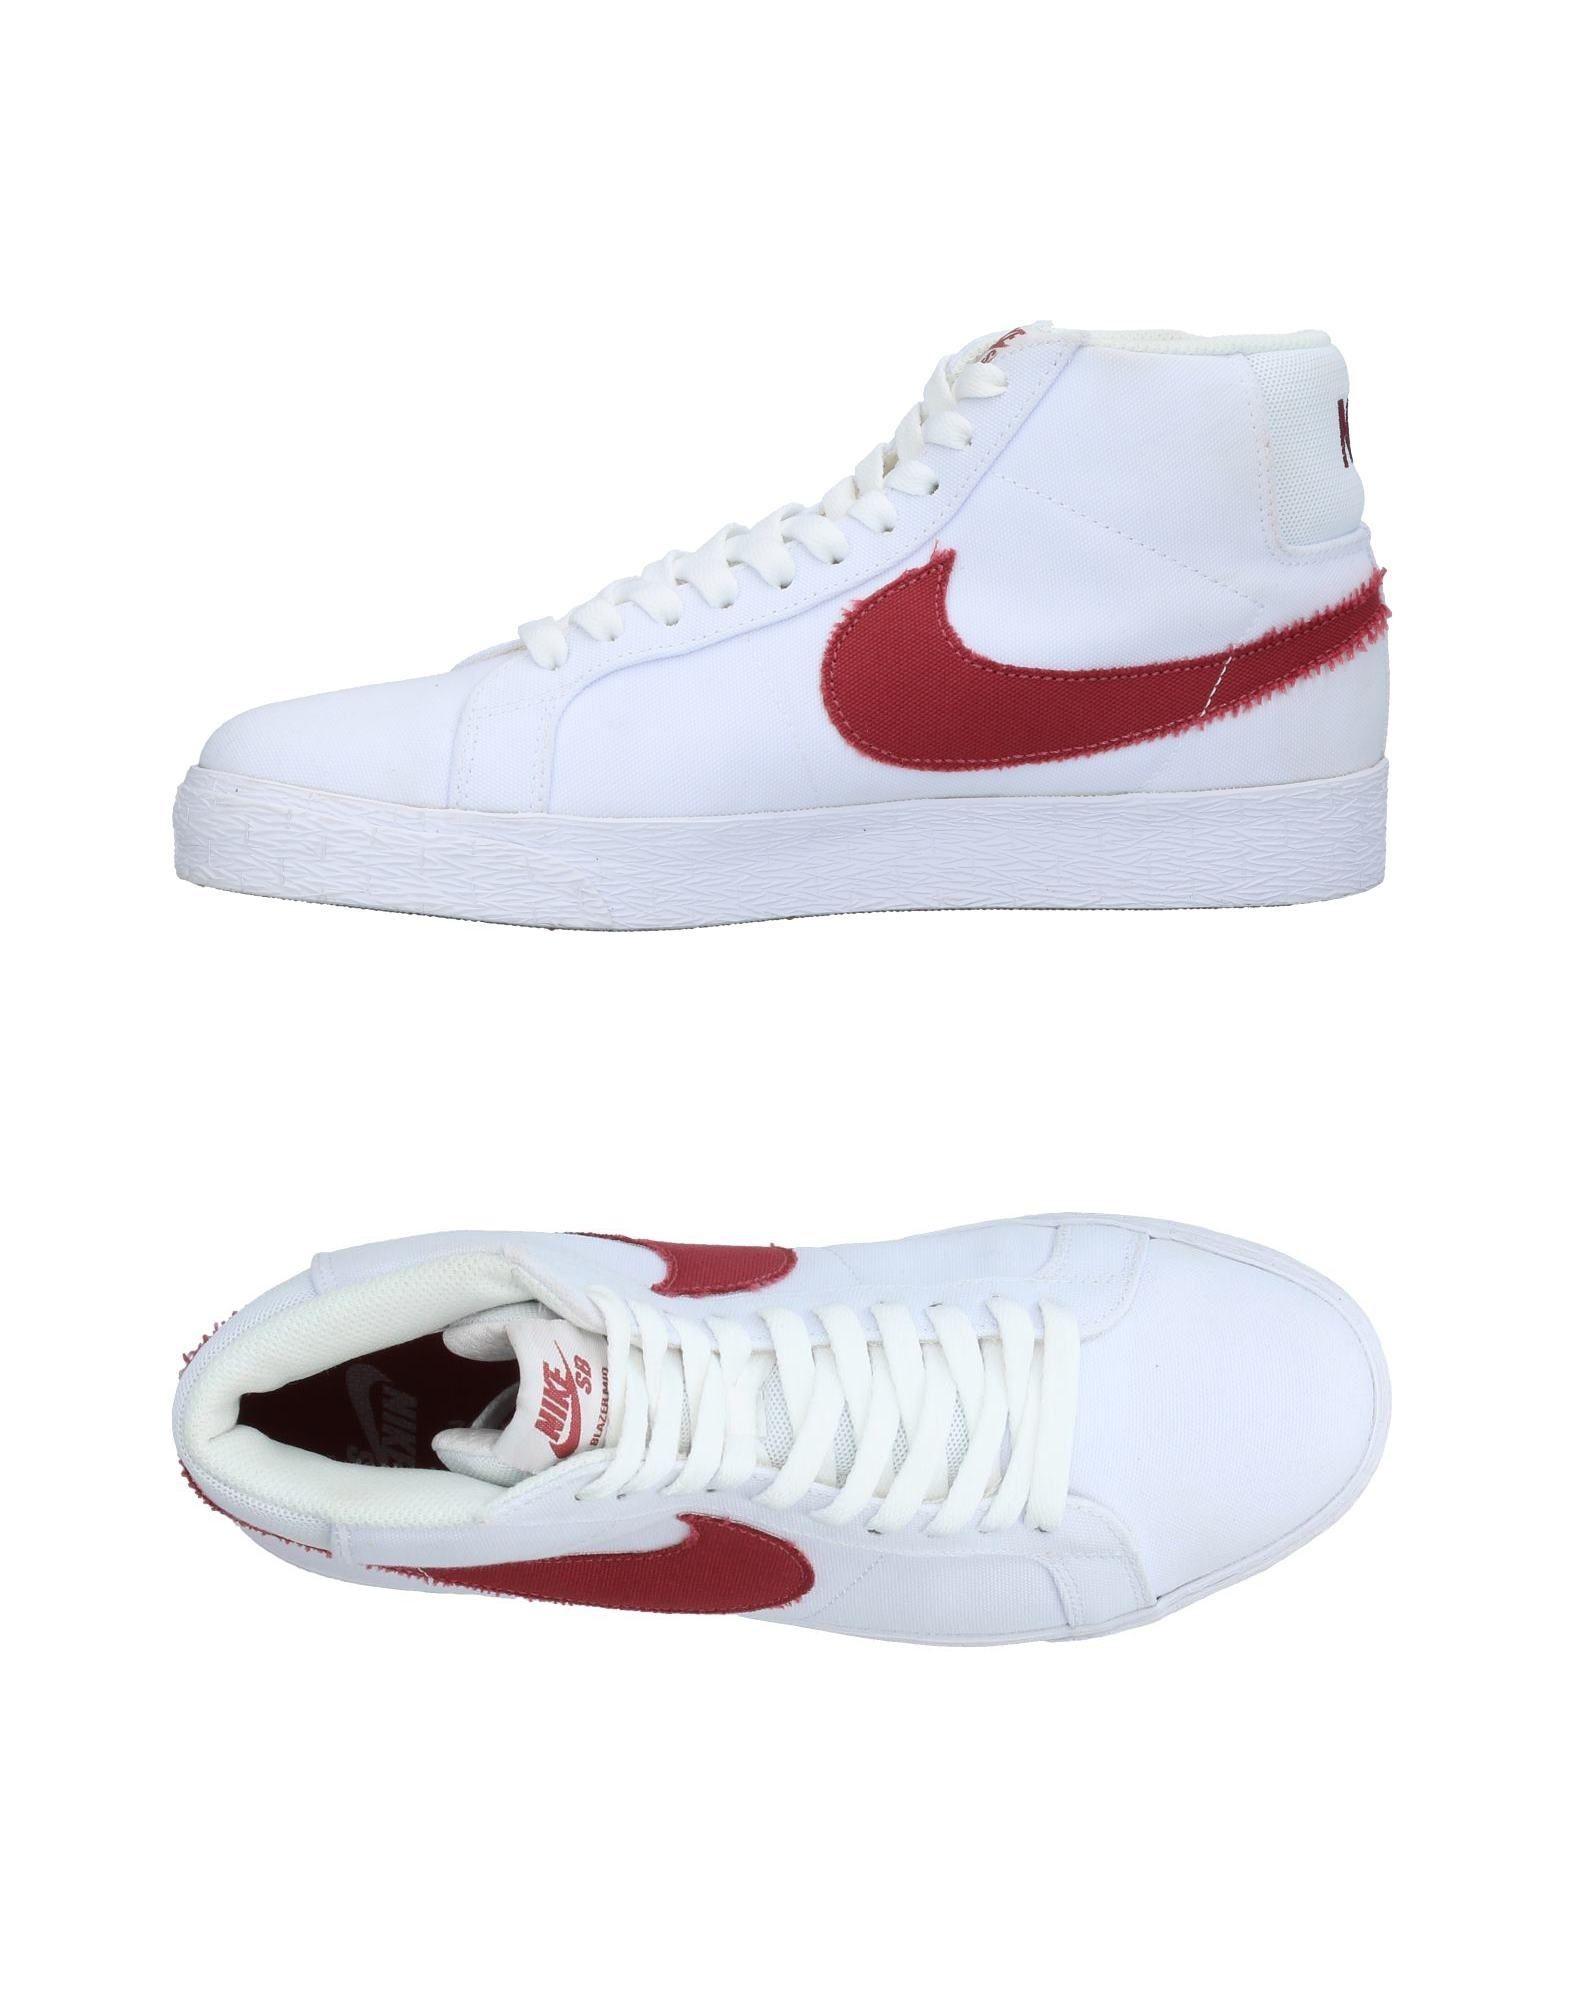 Nike Canvas High-tops & Sneakers in White for Men - Lyst